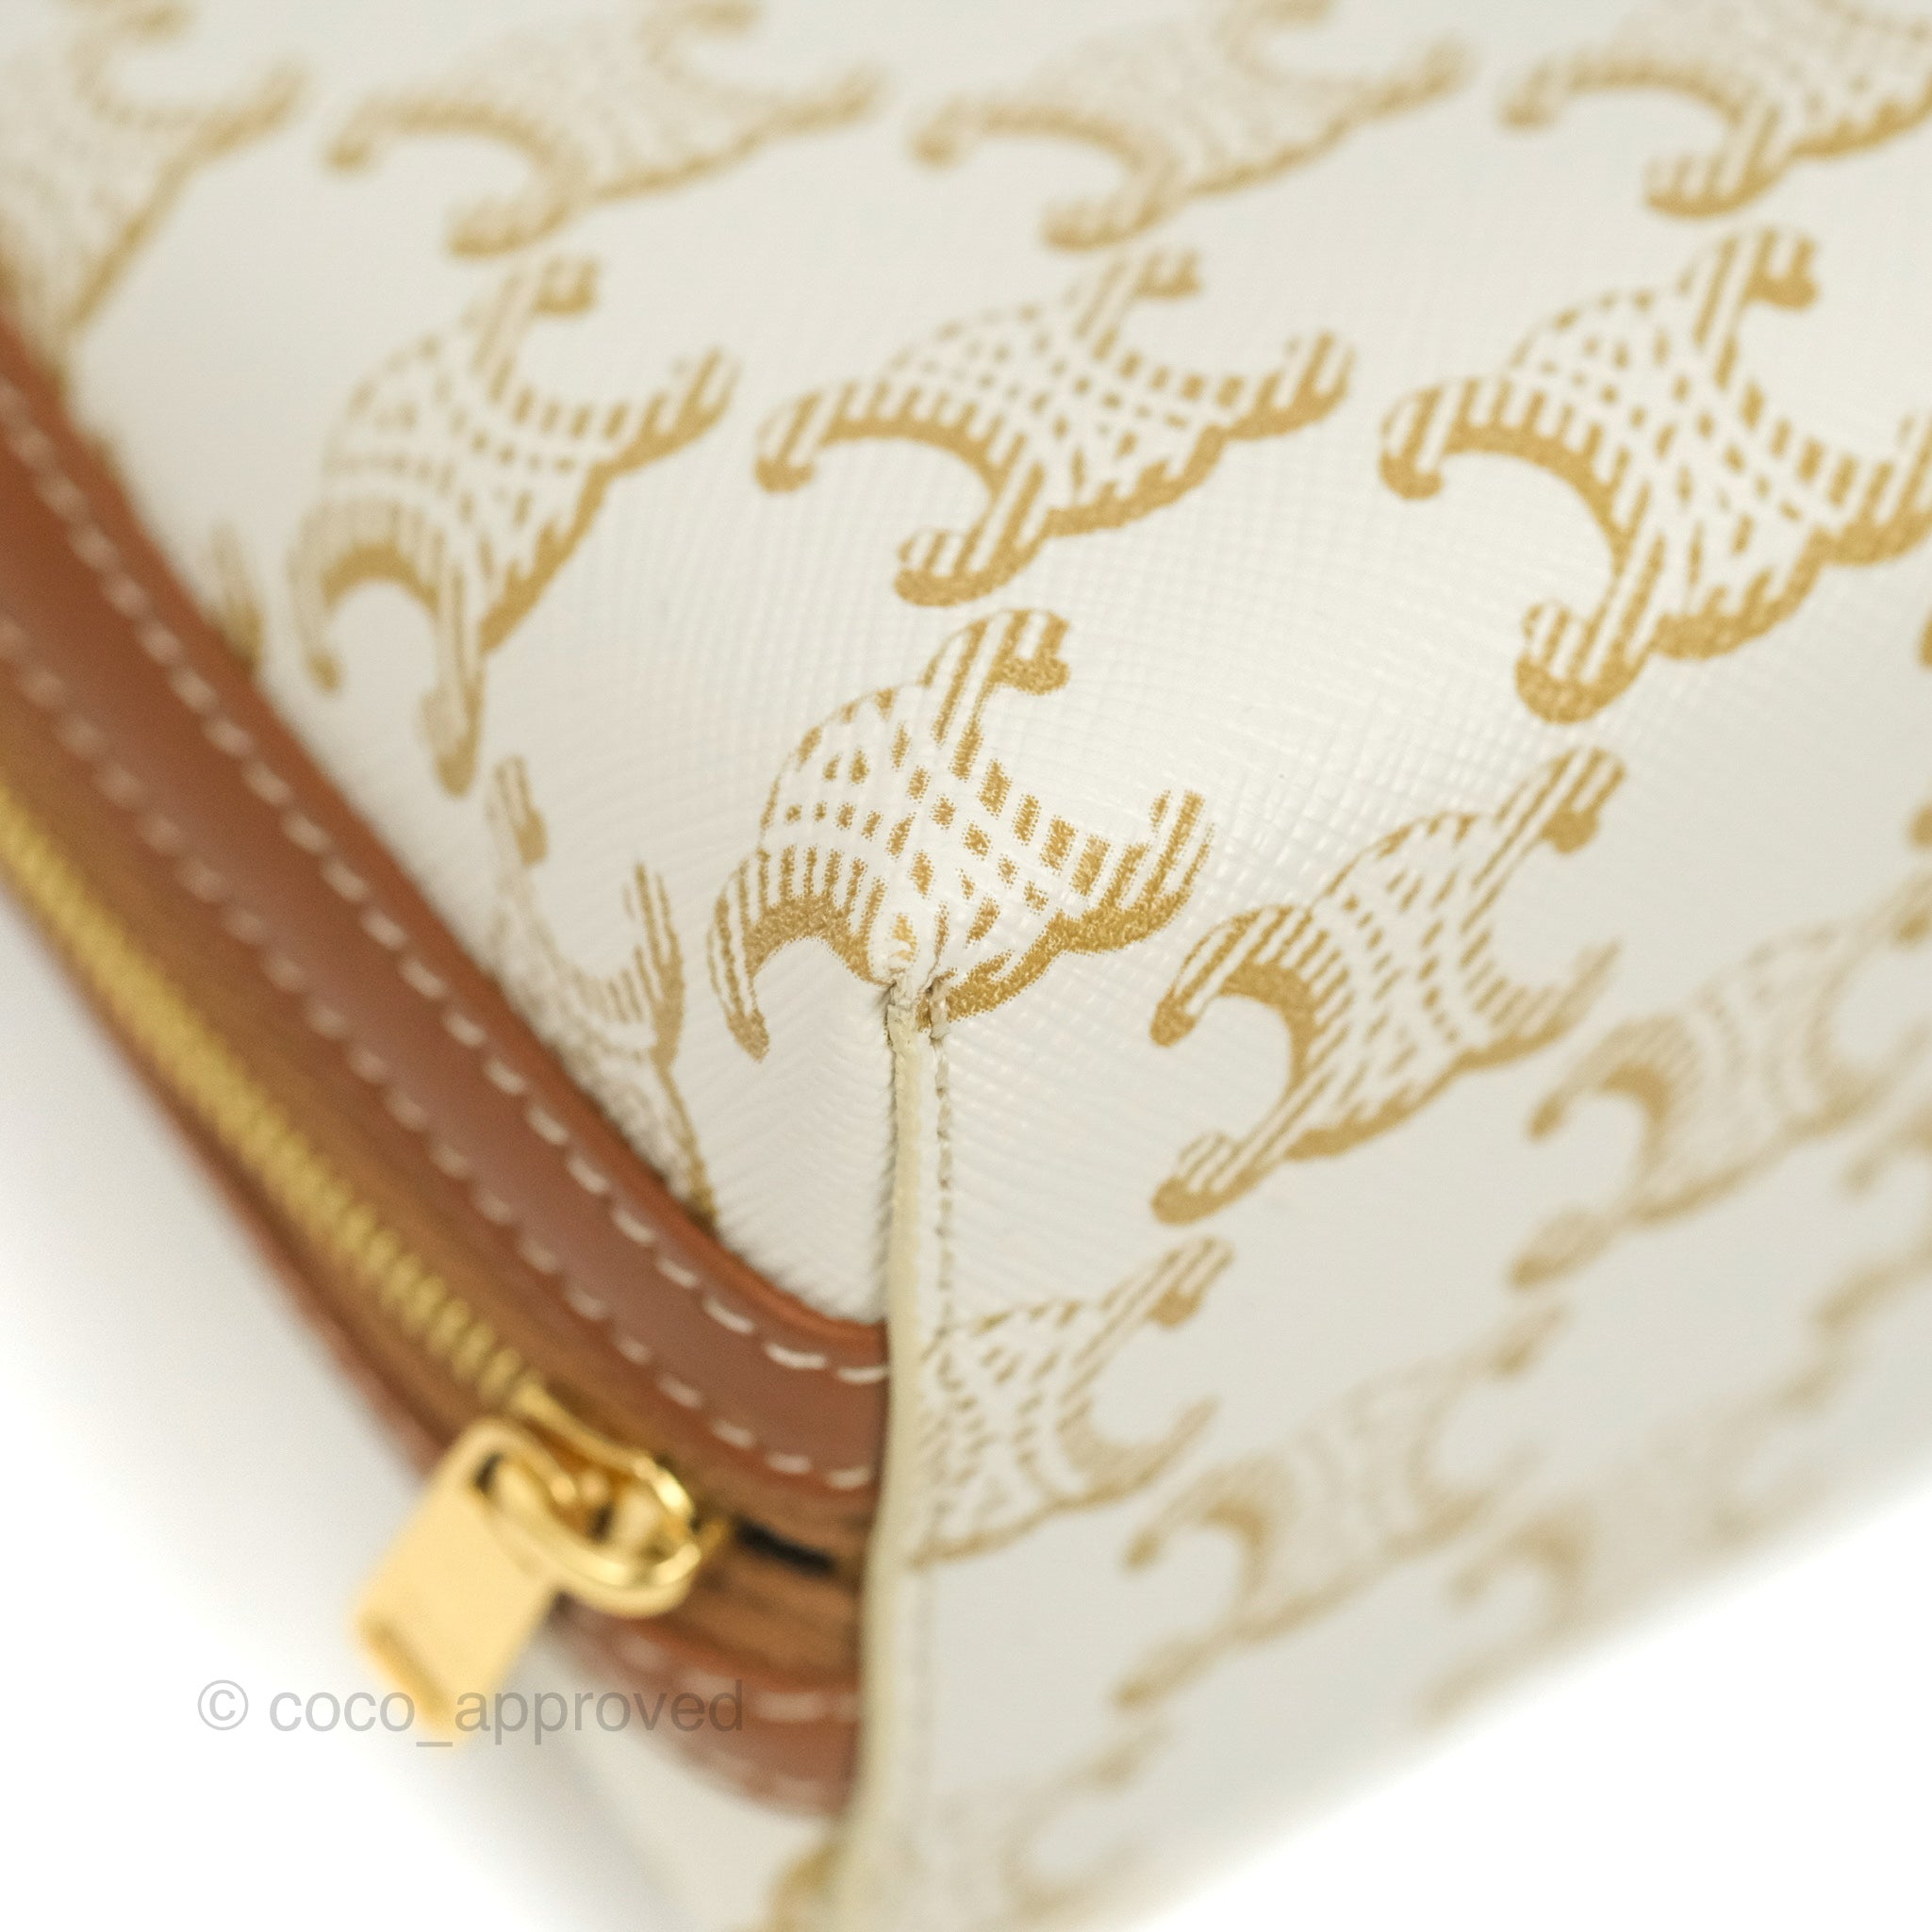 CLUTCH WITH CHAIN IN TRIOMPHE CANVAS AND LAMBSKIN - TAN